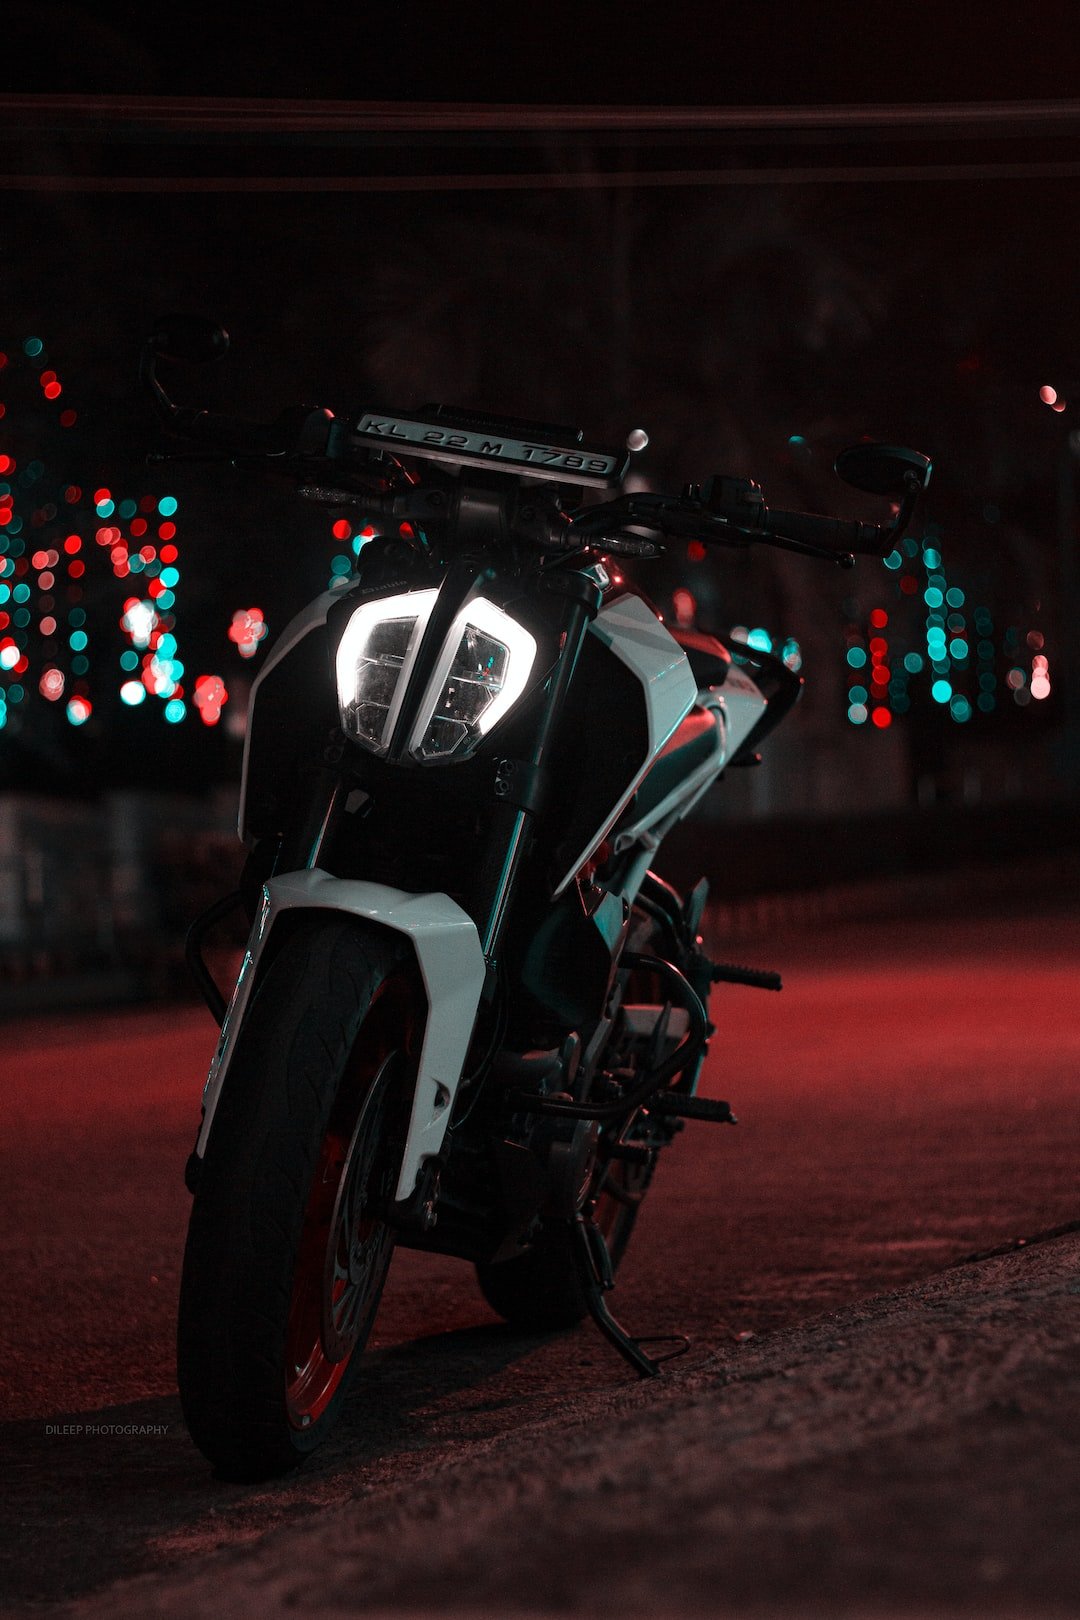 black and white motorcycle on road during night time